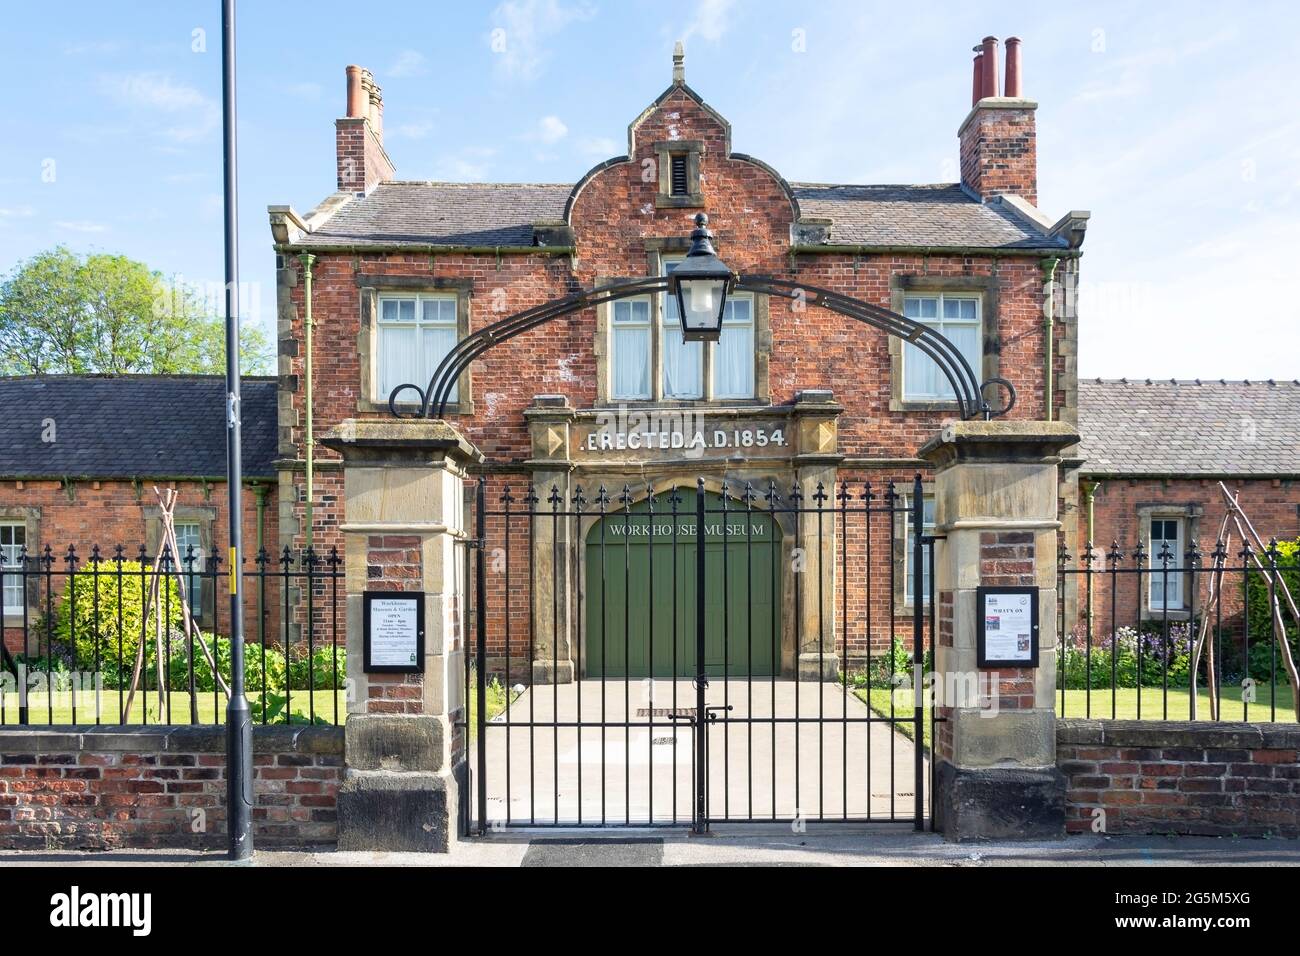 Entrance to Workhouse Museum, Allhallowgate, Ripon, North Yorkshire, England, United Kingdom Stock Photo